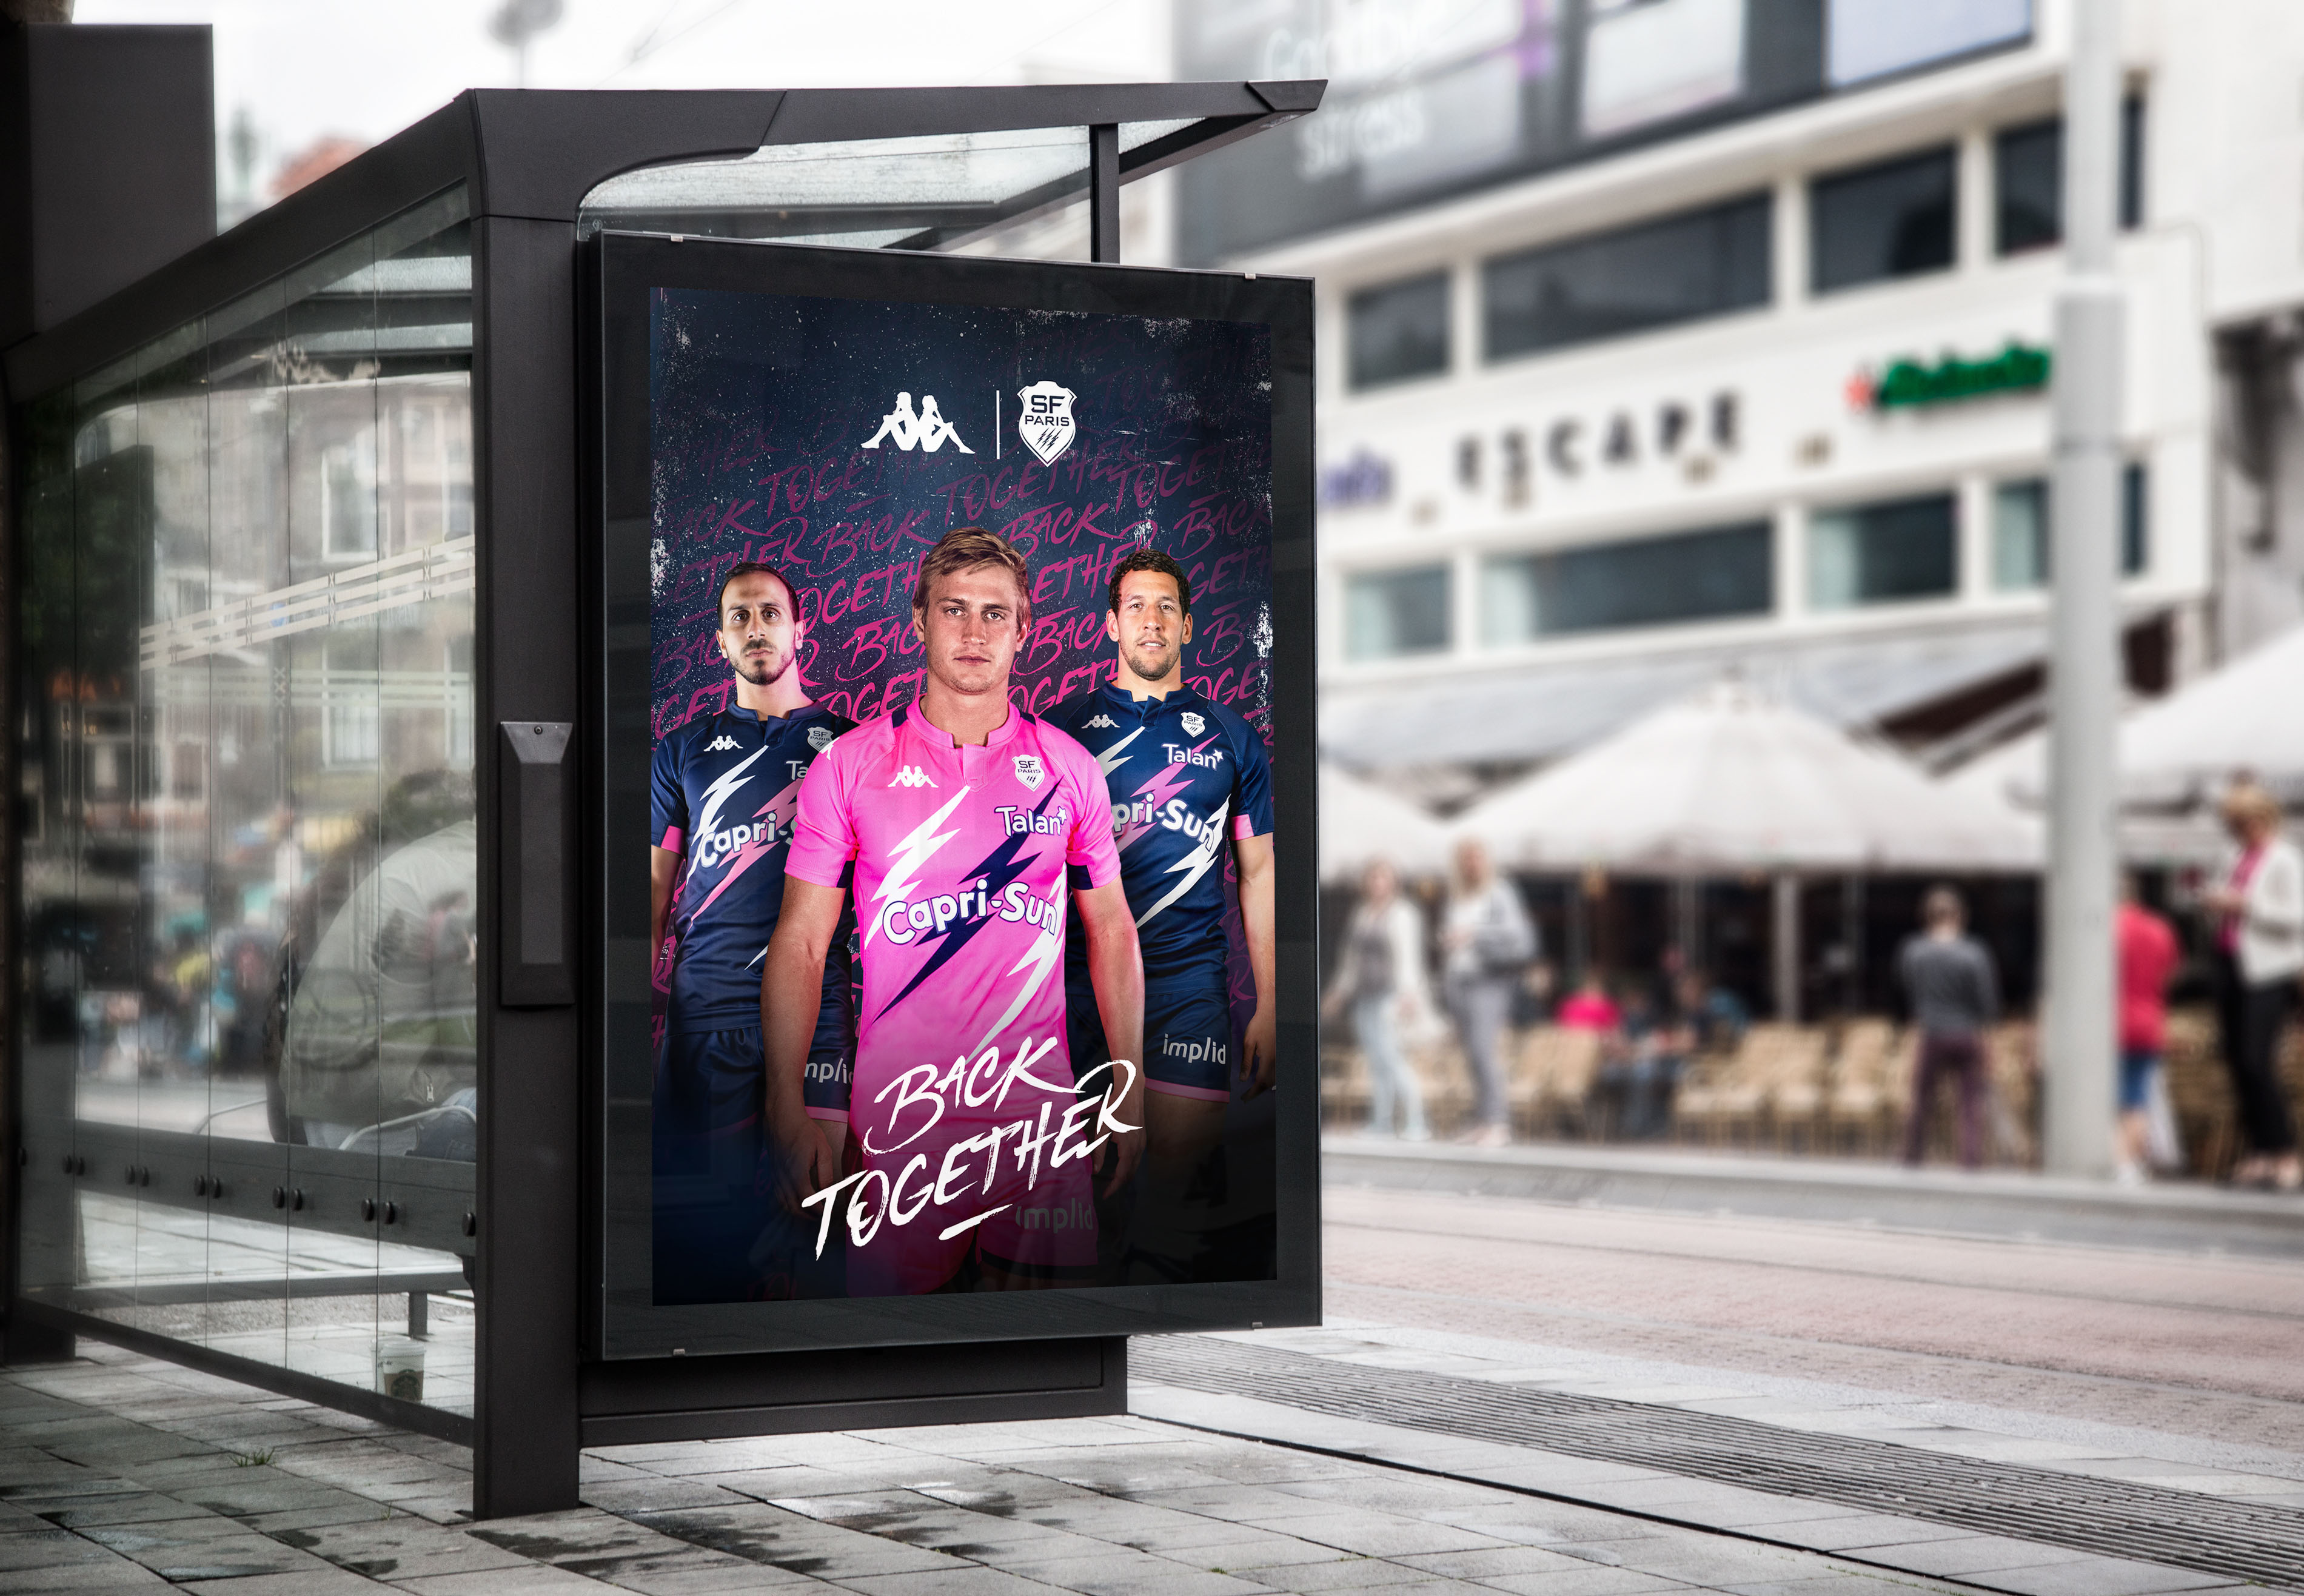 Actualite_news_Kappa_is_back_stade_francais_paris_french_rugby